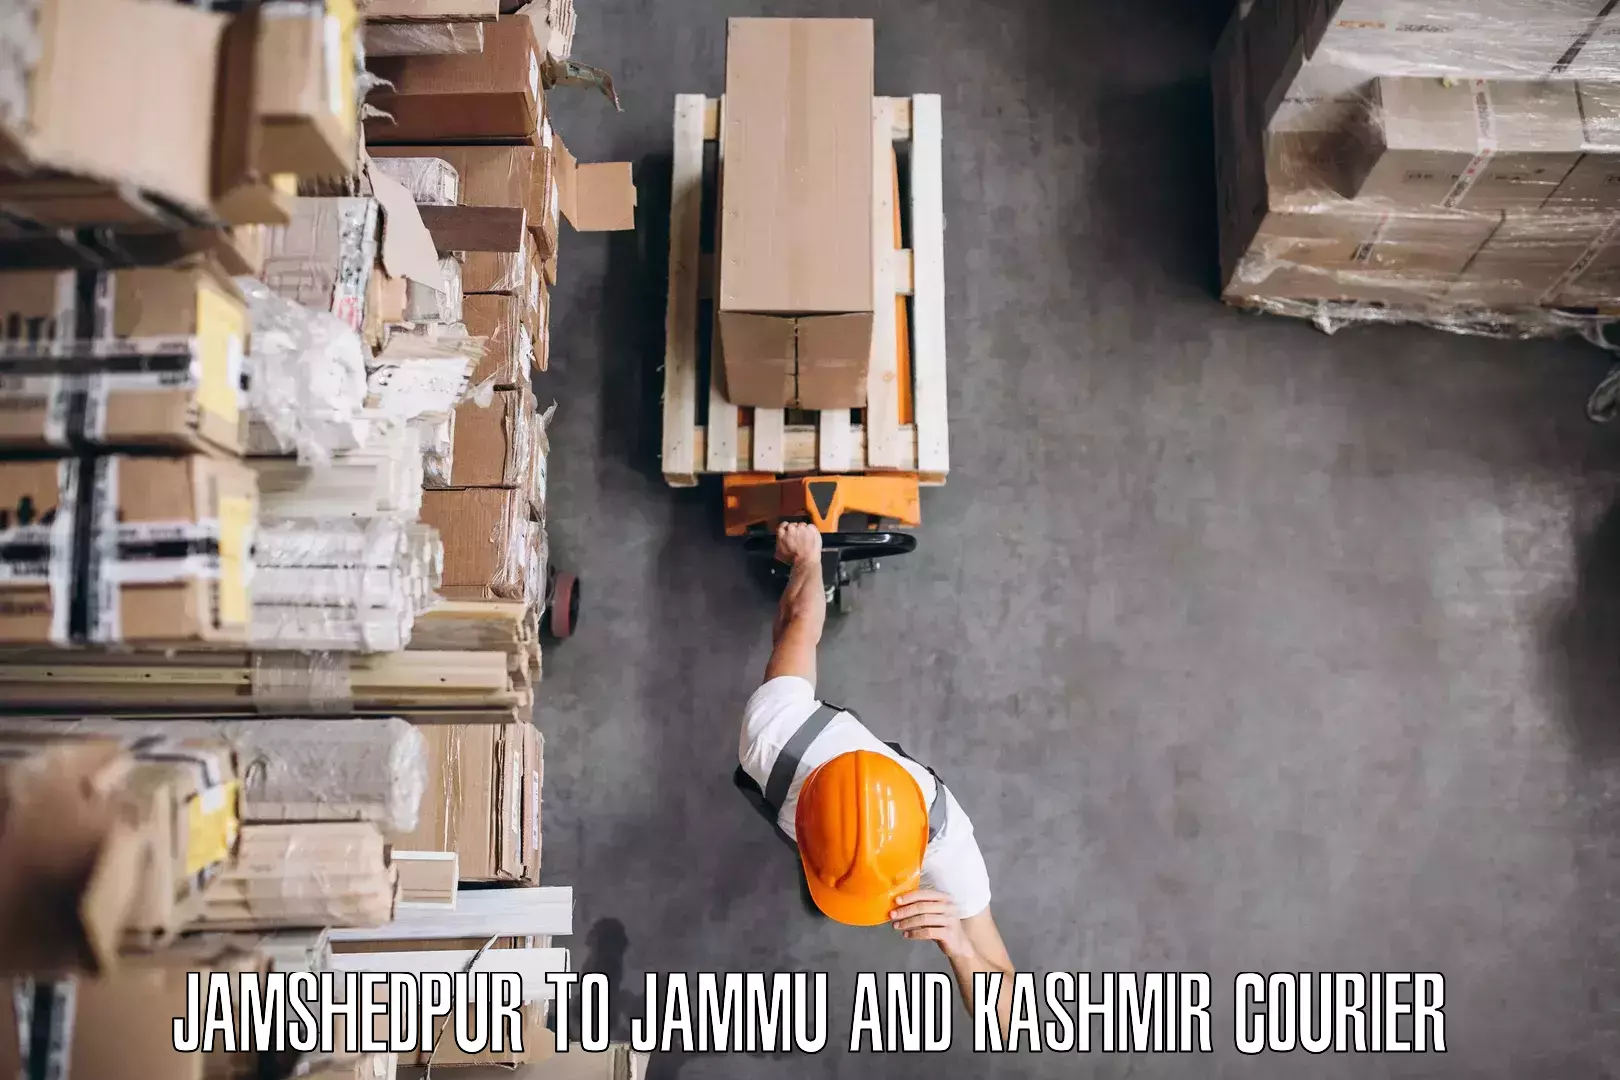 Quality household transport in Jamshedpur to Jammu and Kashmir